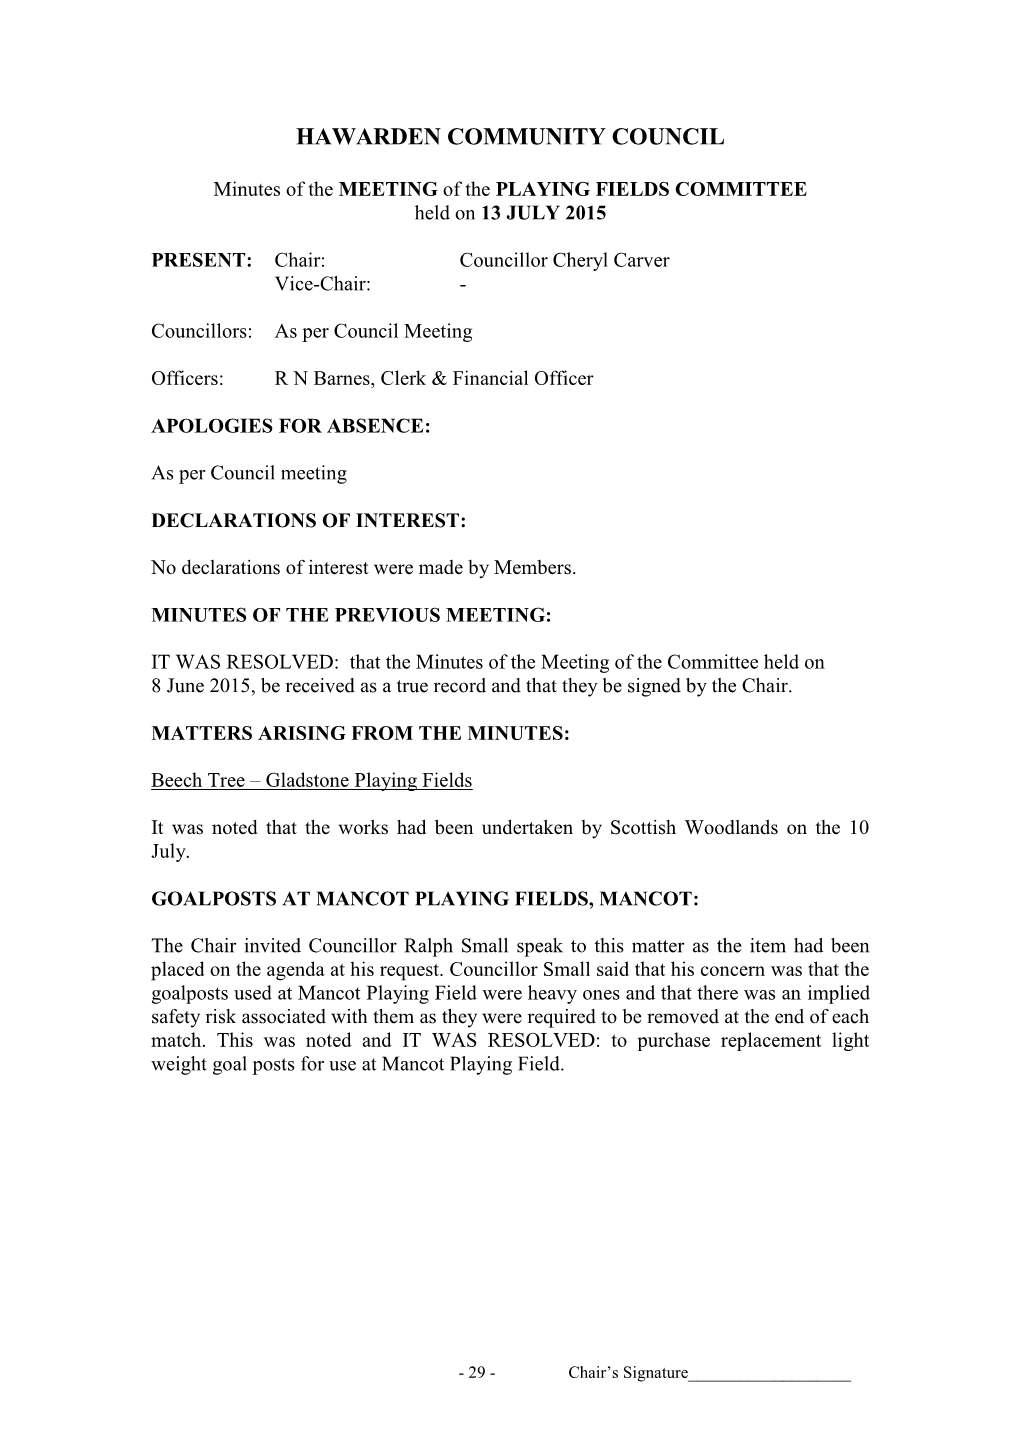 Minutes of the MEETING of the PLAYING FIELDS COMMITTEE Held on 13 JULY 2015